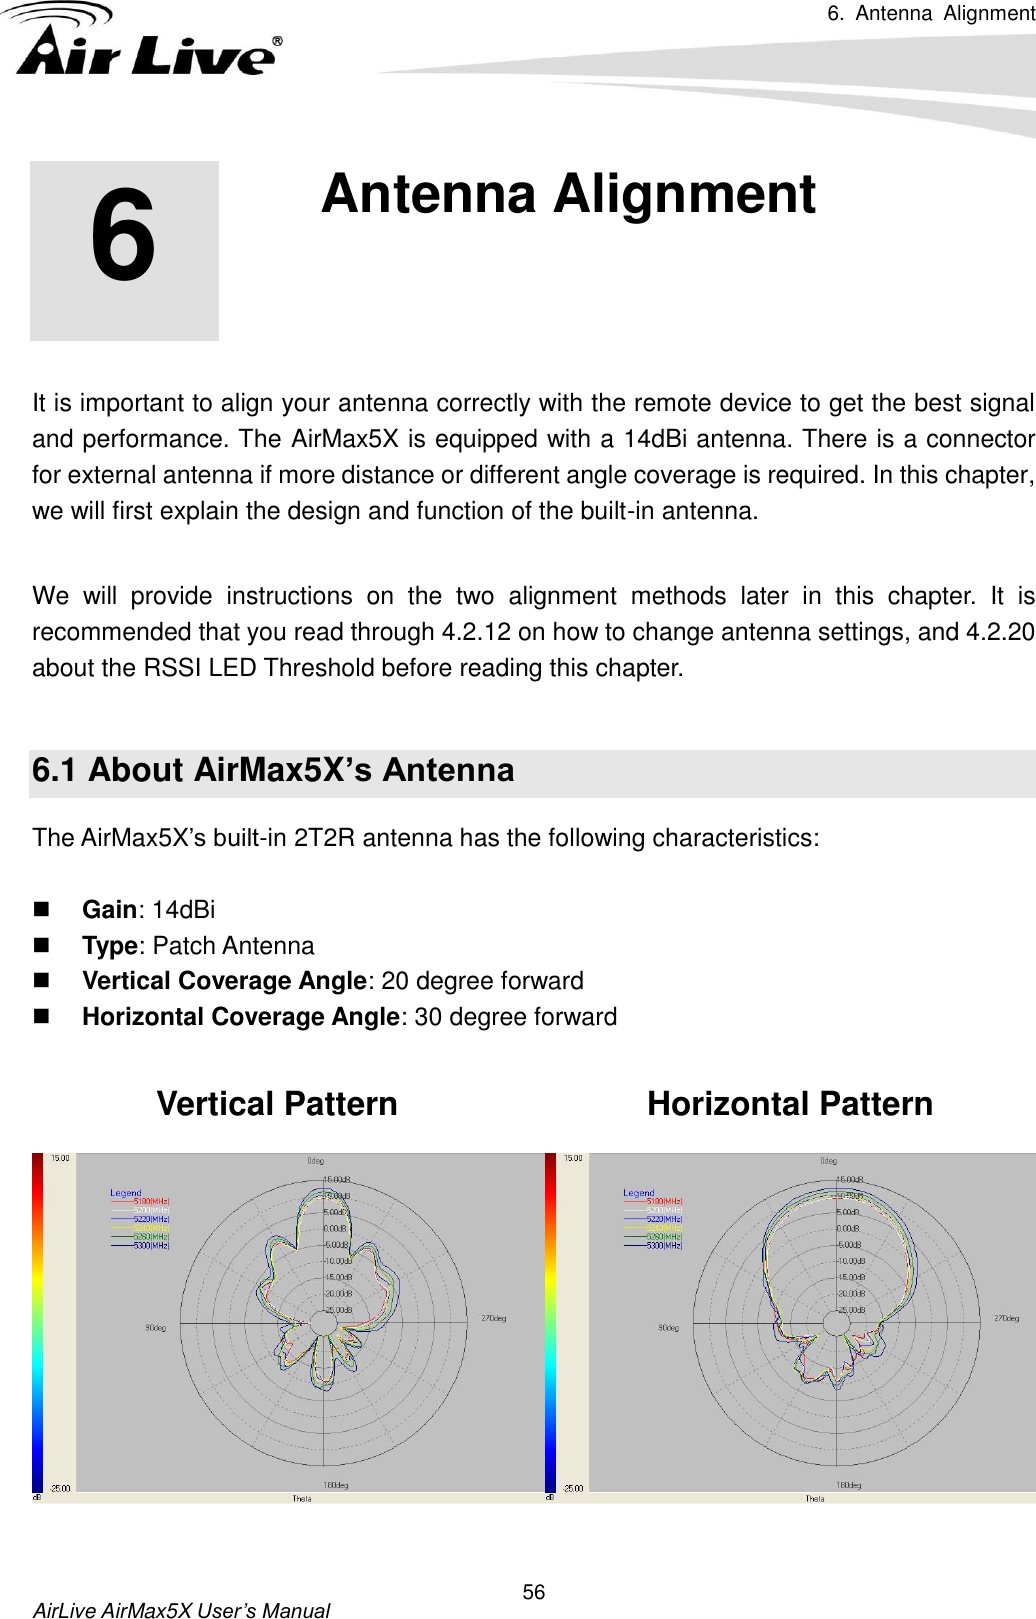 6.  Antenna  Alignment   AirLive AirMax5X User’s Manual 56       It is important to align your antenna correctly with the remote device to get the best signal and performance. The AirMax5X is equipped with a 14dBi antenna. There is a connector for external antenna if more distance or different angle coverage is required. In this chapter, we will first explain the design and function of the built-in antenna.    We  will  provide  instructions  on  the  two  alignment  methods  later  in  this  chapter.  It  is recommended that you read through 4.2.12 on how to change antenna settings, and 4.2.20 about the RSSI LED Threshold before reading this chapter.  6.1 About AirMax5X’s Antenna The AirMax5X’s built-in 2T2R antenna has the following characteristics:   Gain: 14dBi    Type: Patch Antenna  Vertical Coverage Angle: 20 degree forward  Horizontal Coverage Angle: 30 degree forward  Vertical Pattern Horizontal Pattern    6 6. Antenna Alignment  